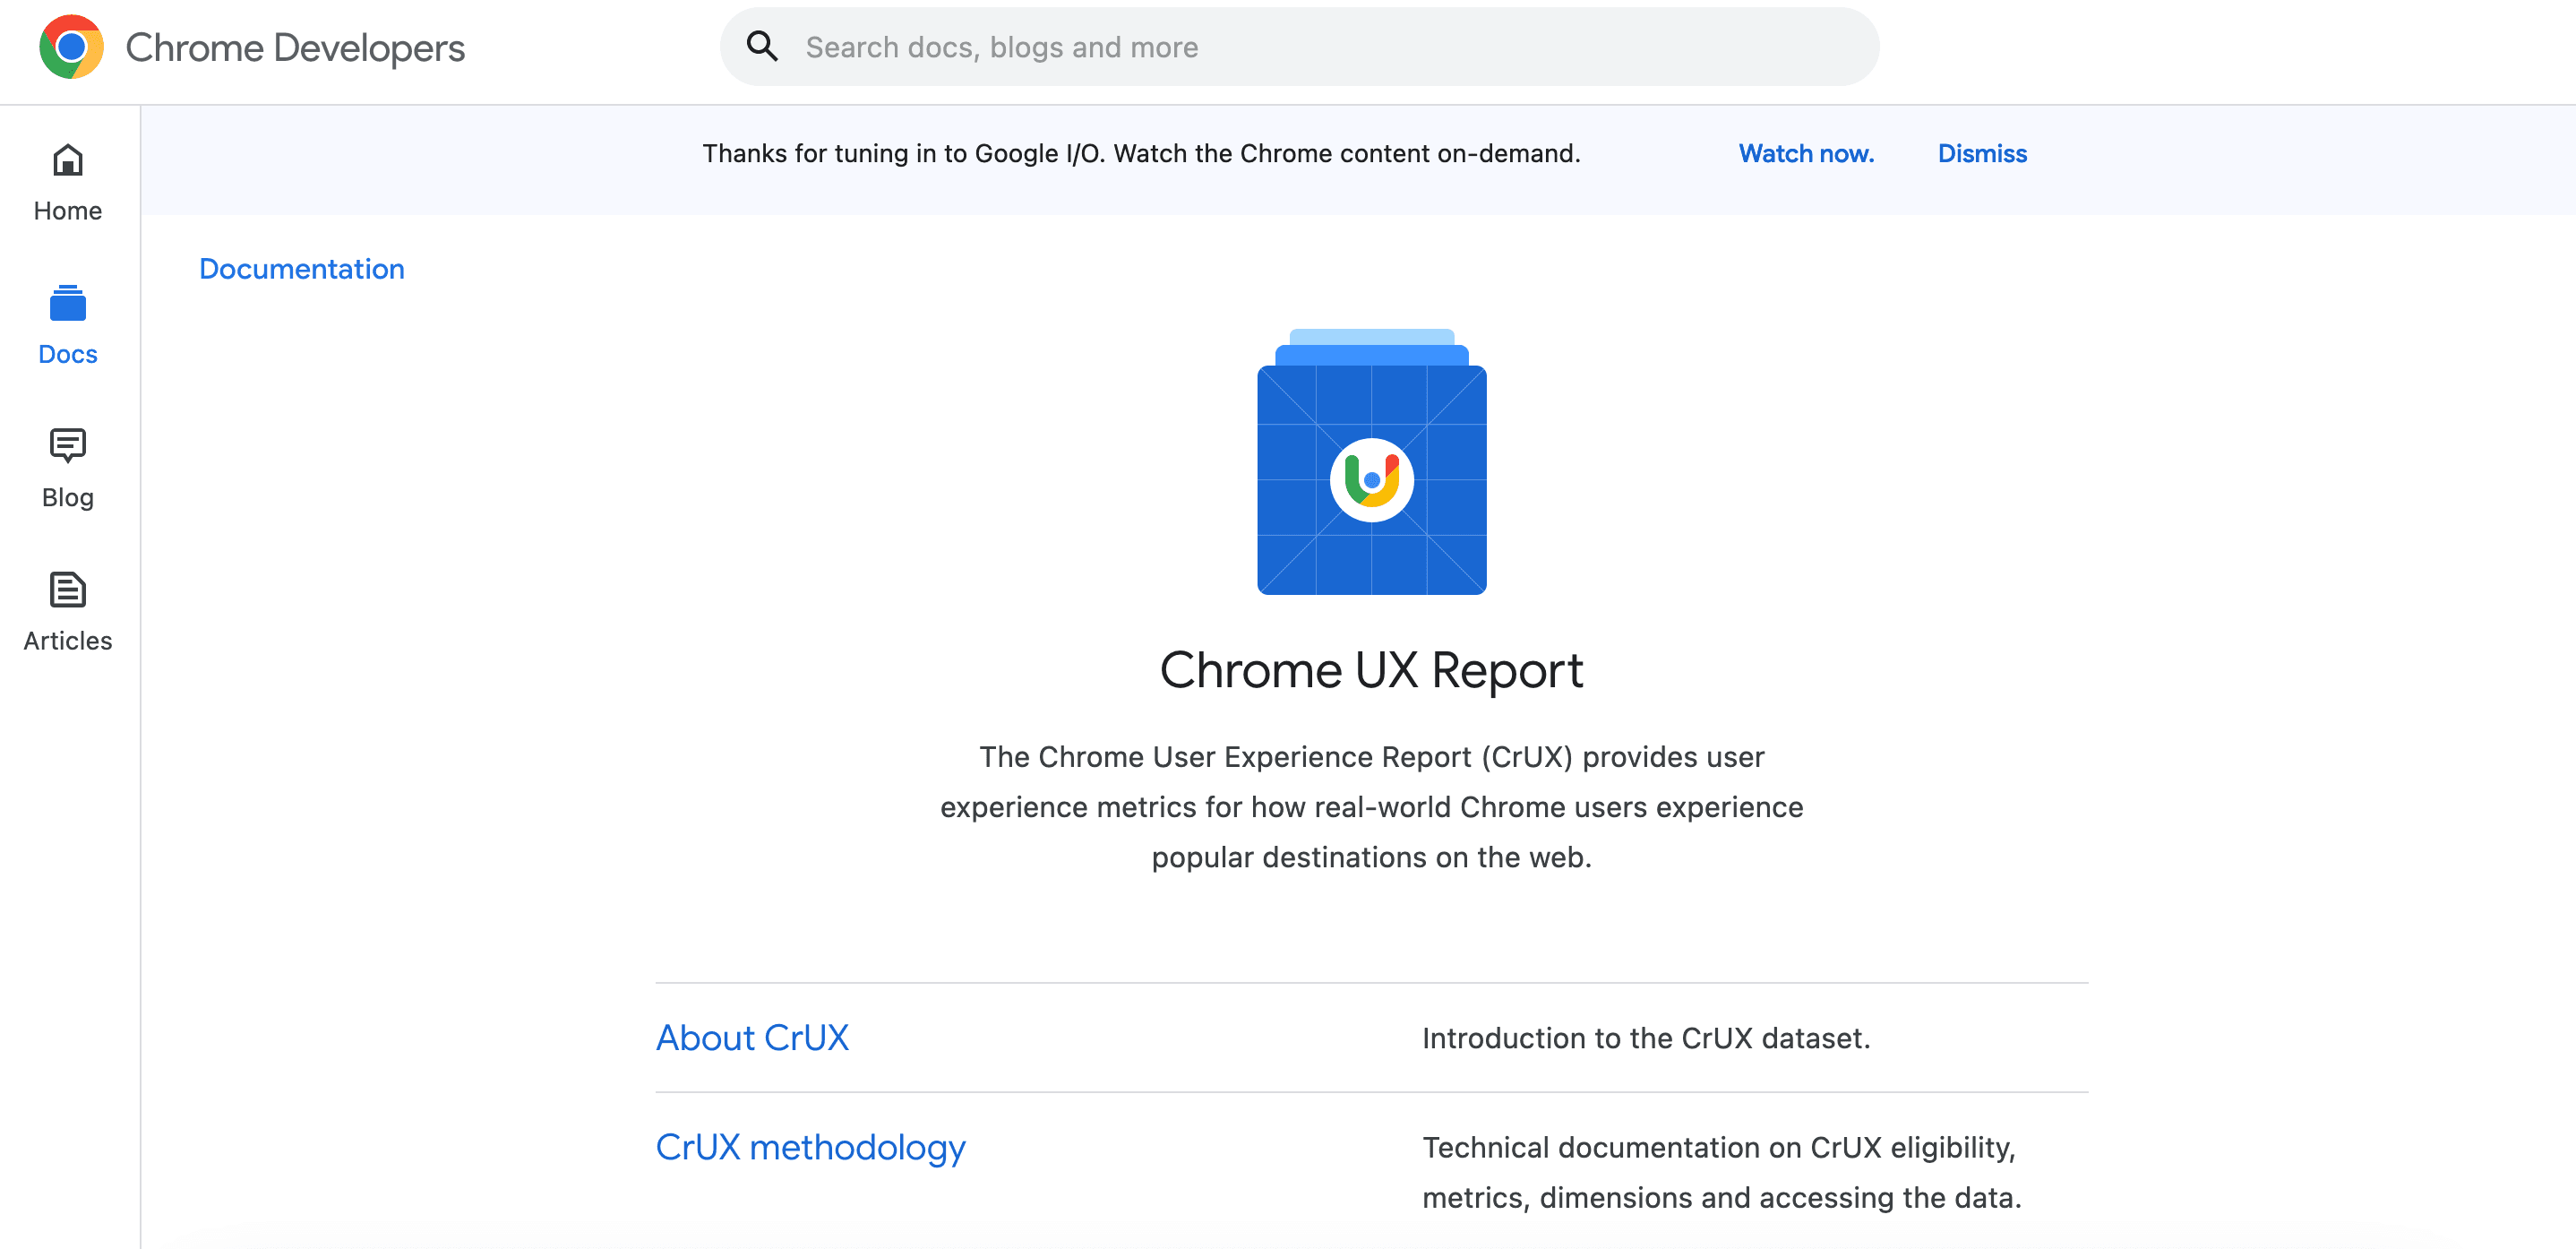 Chrome User Experience Report (CrUX)